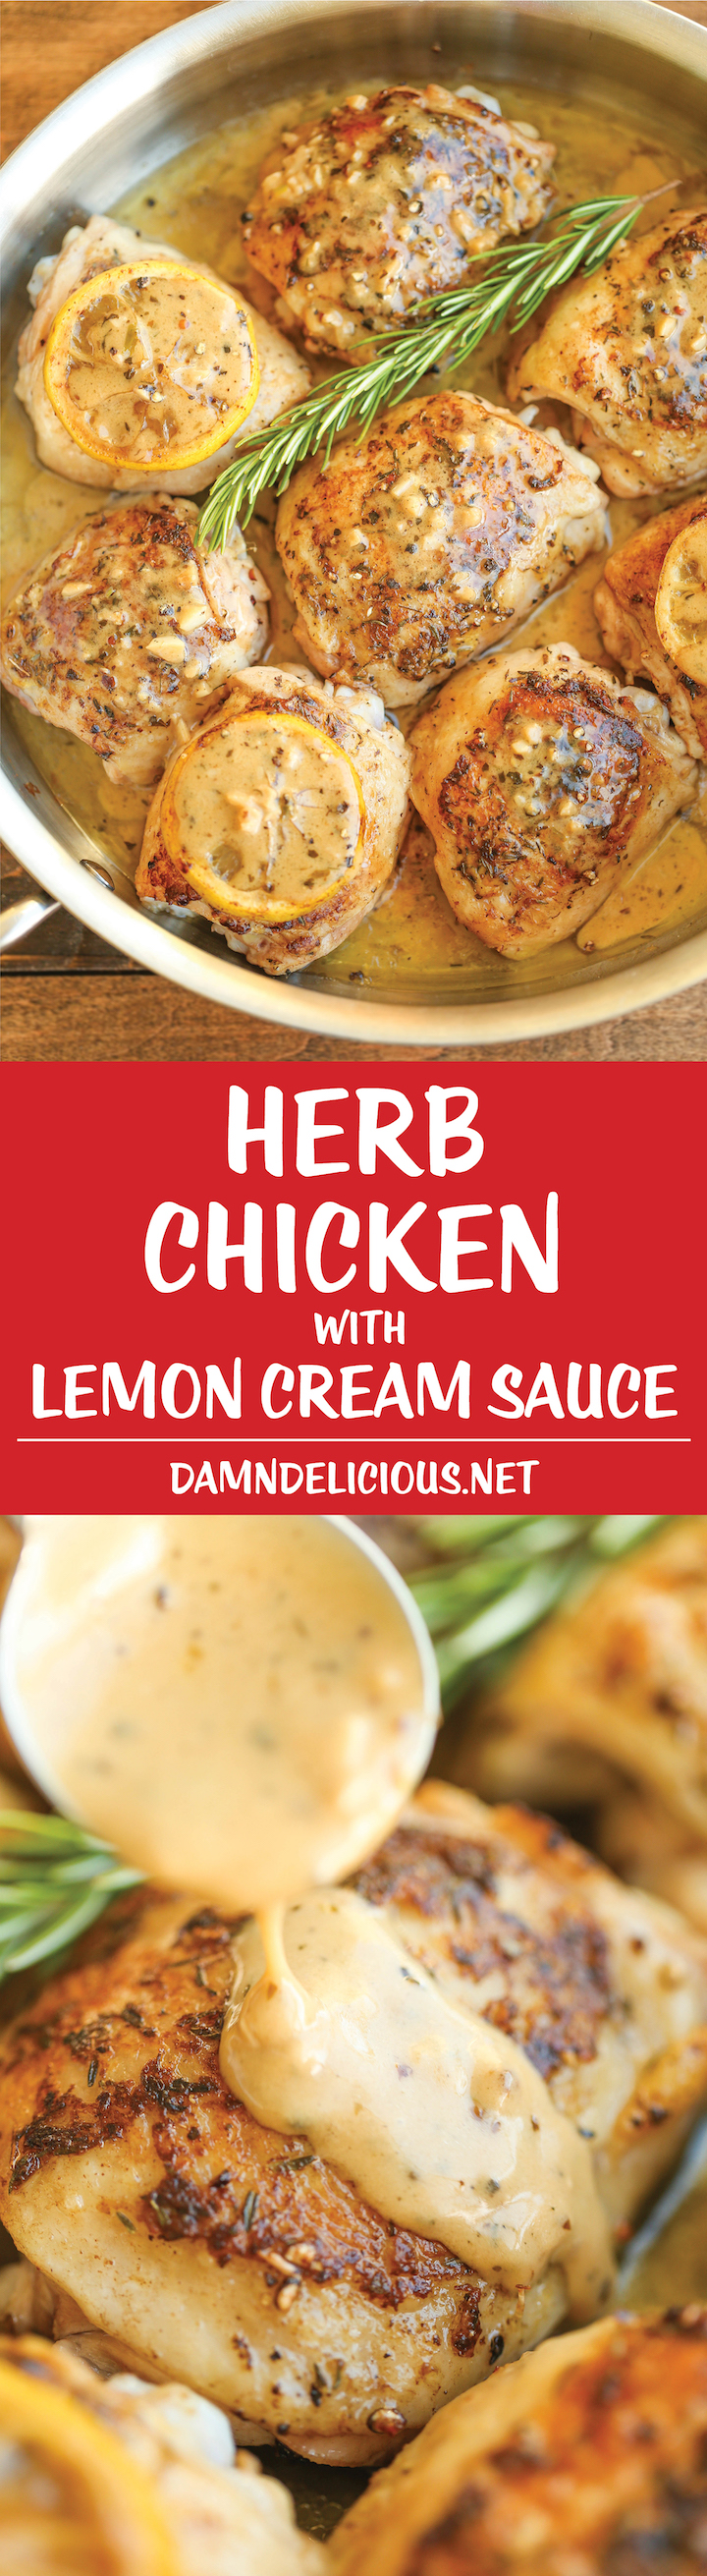 Herb Chicken with Lemon Cream Sauce - This cream sauce is seriously out of this world. So tangy, buttery, creamy and just melt-in-your-mouth AMAZING!